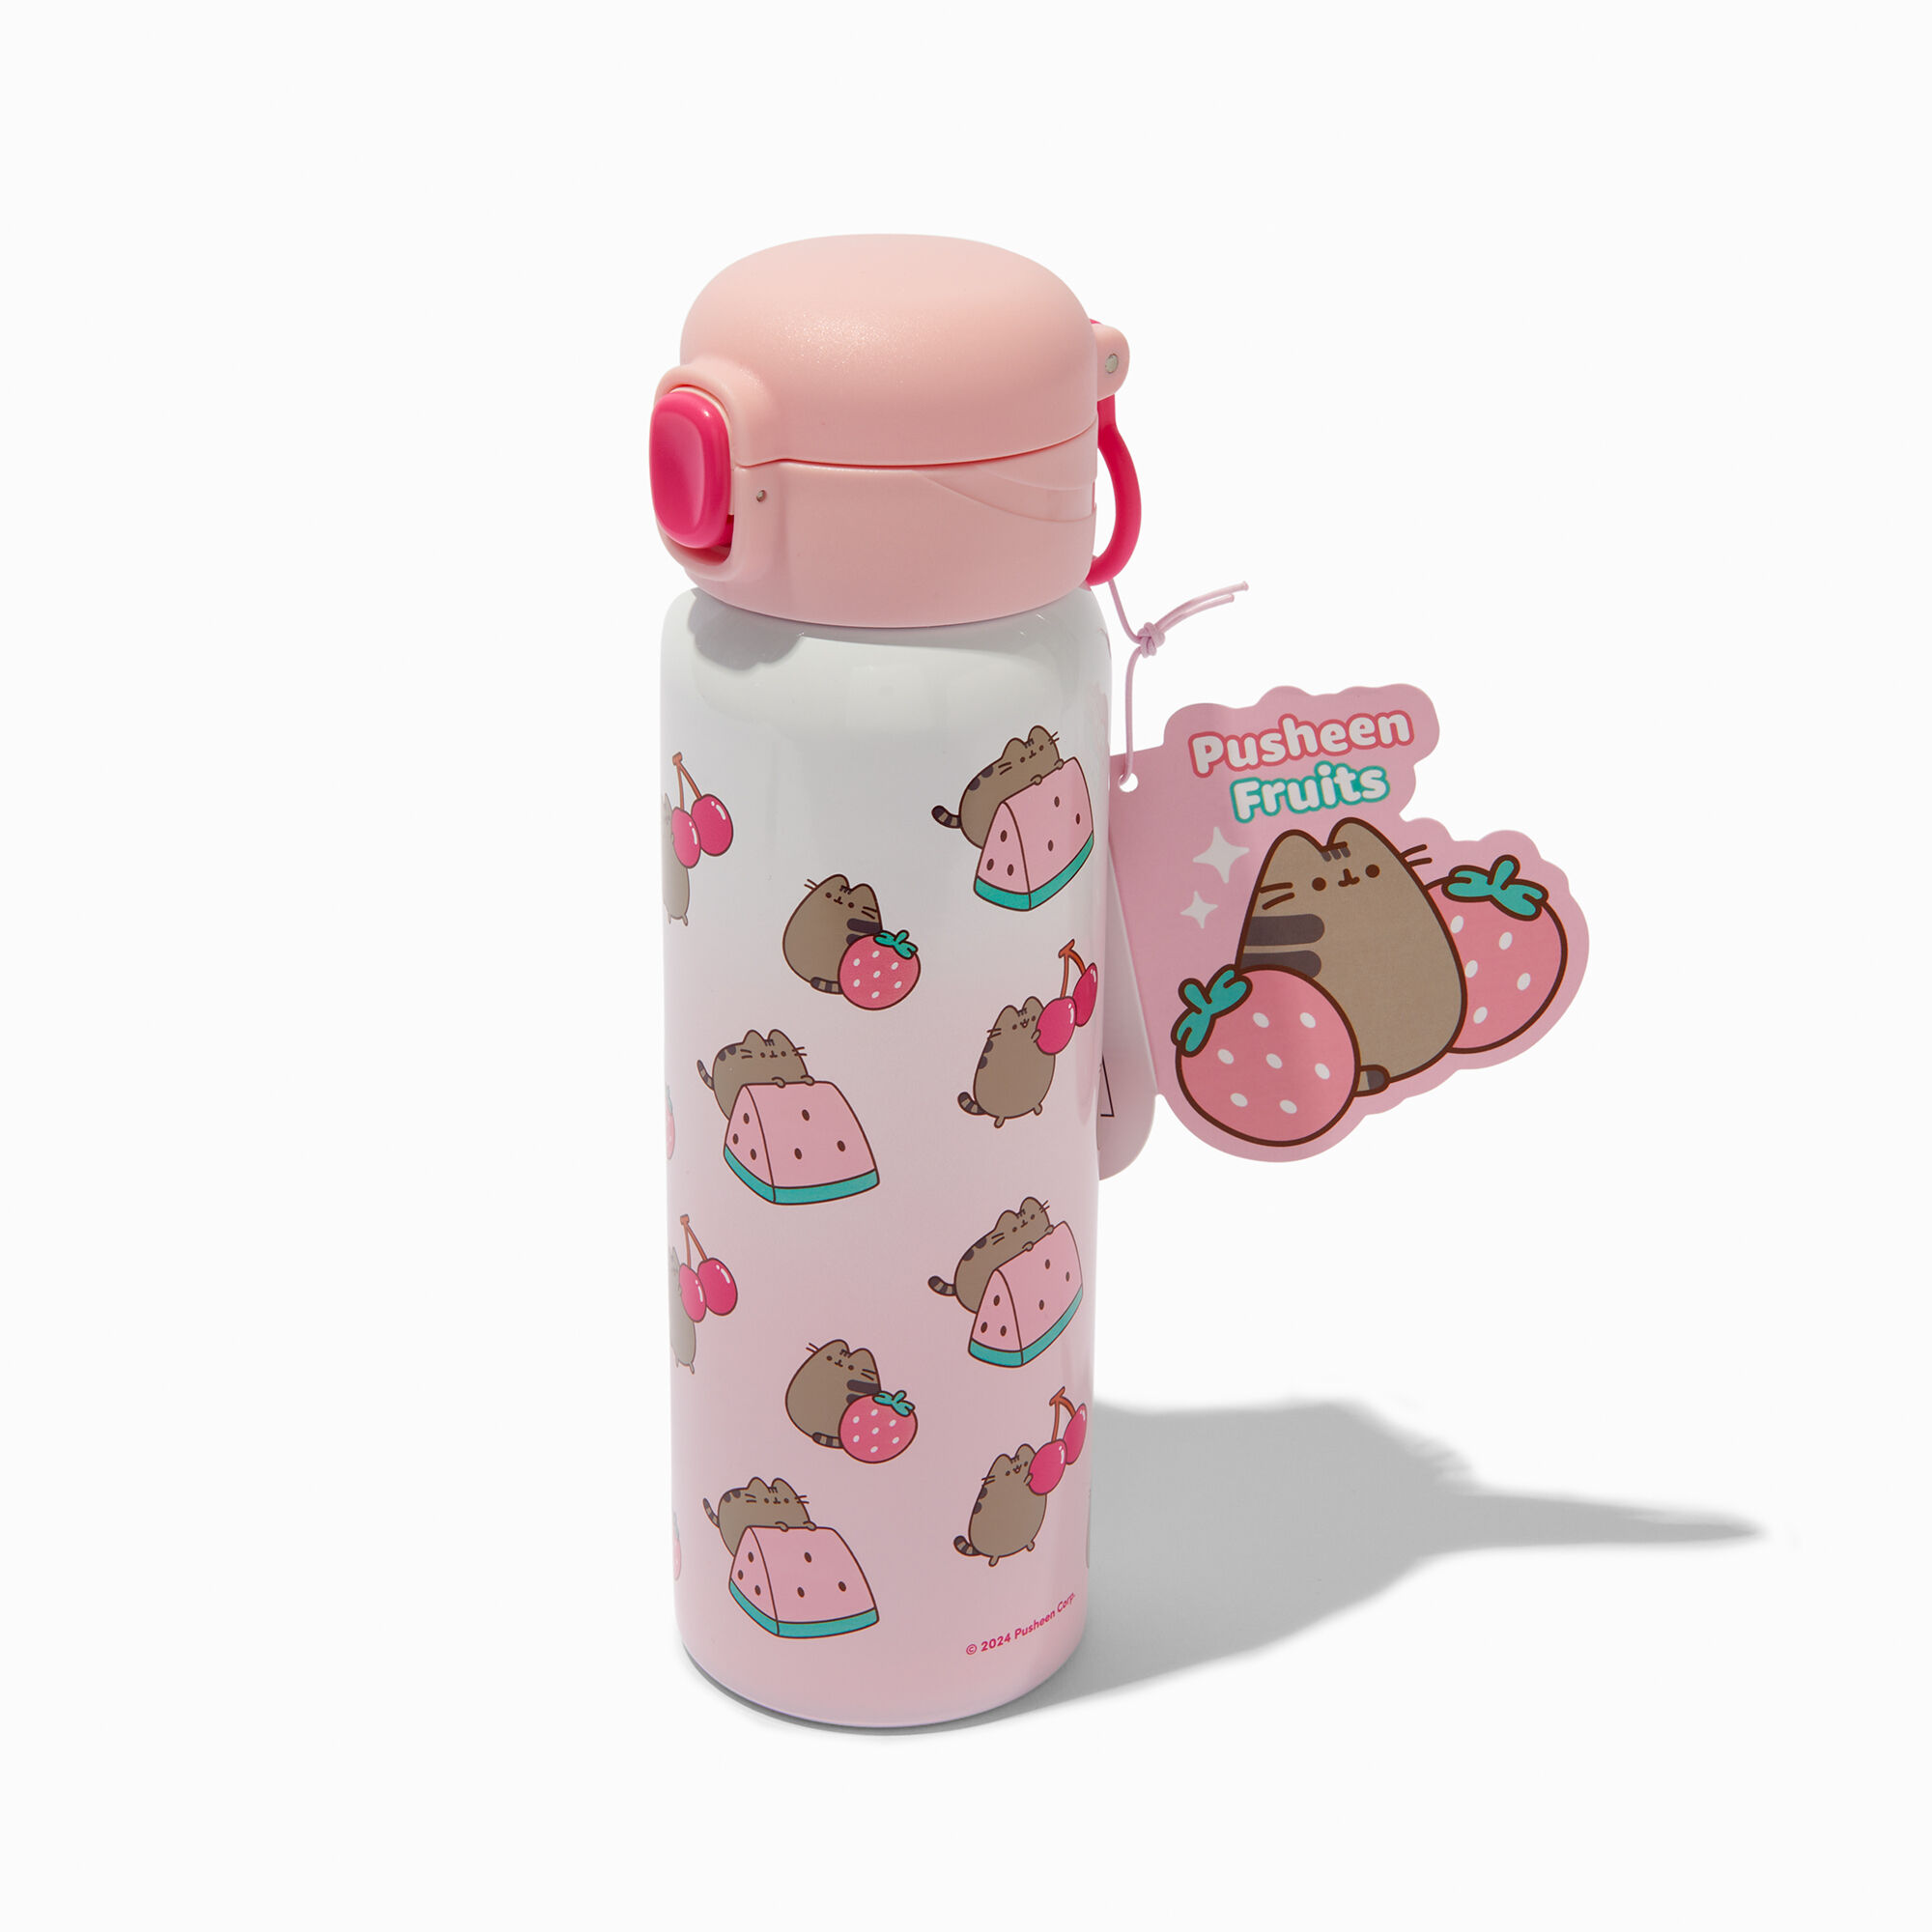 View Claires Pusheen Fruitswater Bottle information